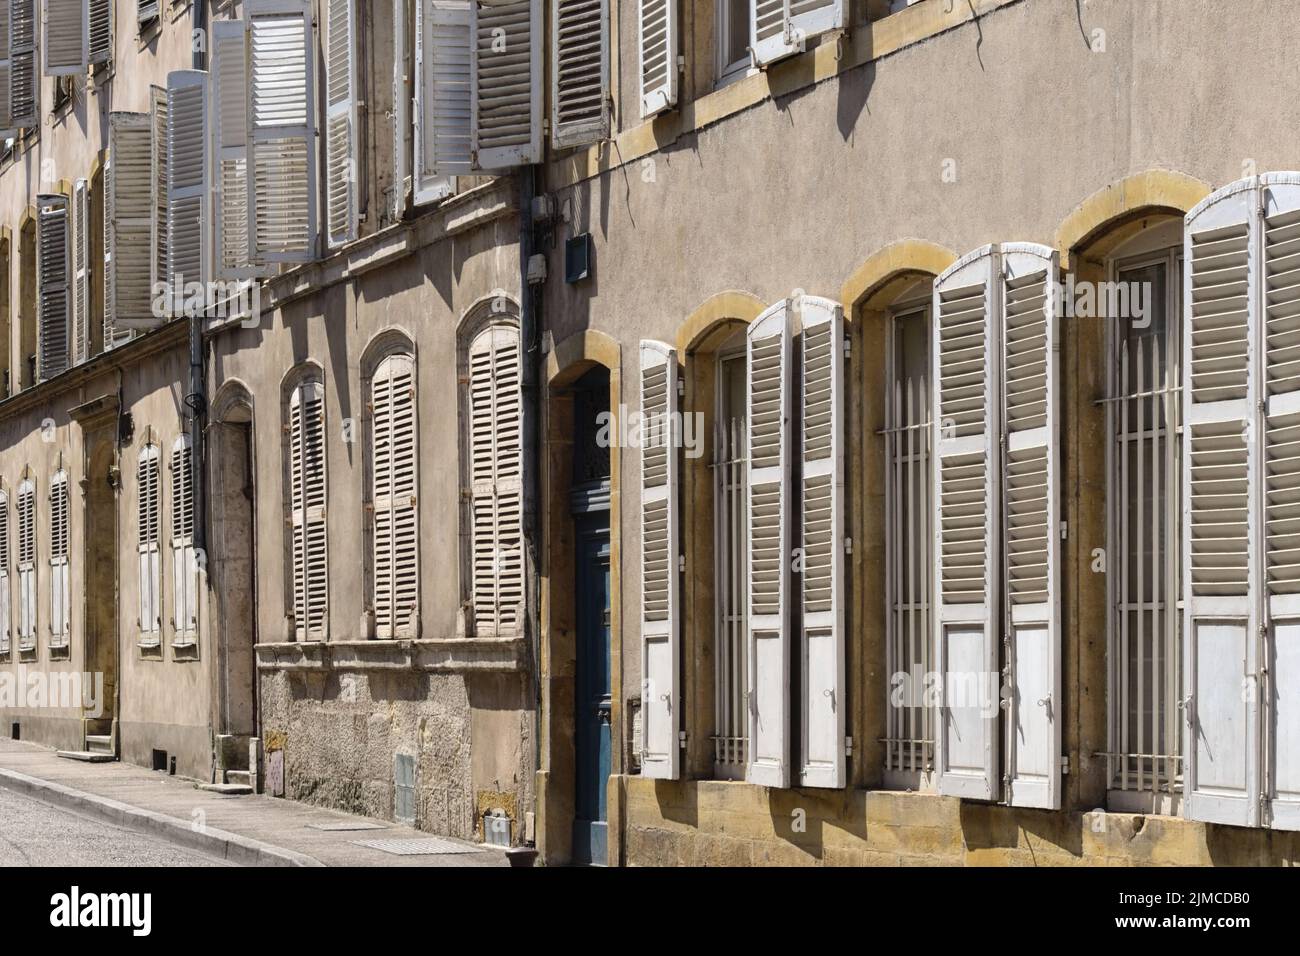 Metz - Old town houses with window shutters, France Stock Photo